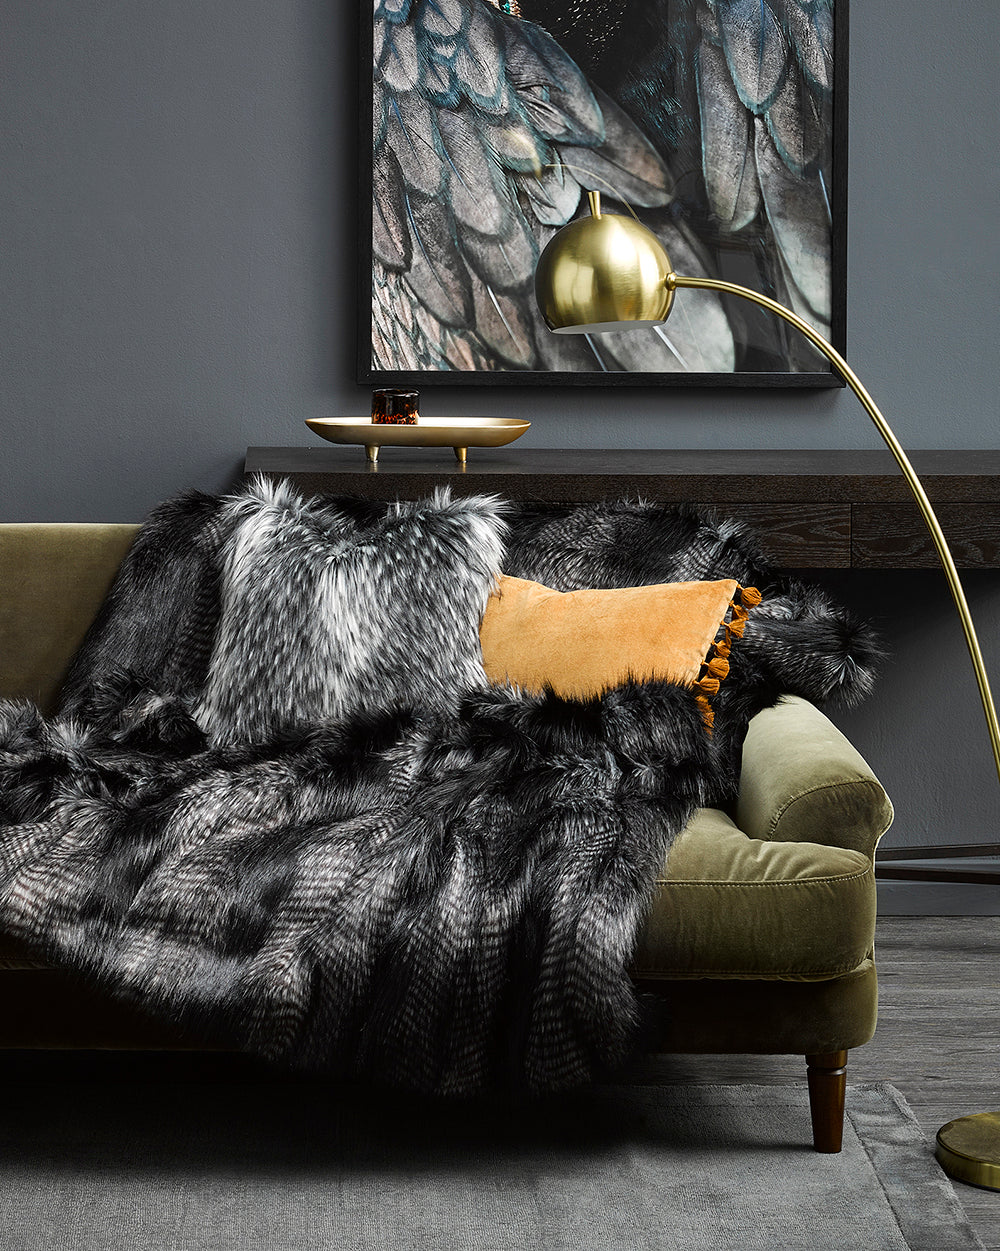 Alaskan Wolf imitation fur throw from heirloom in a lifestyle shote, grey scene with bird picture on the wall and Alaskan Wolf cushion on a green velvet sofa with a grey stone looking lamp and silver coffee table